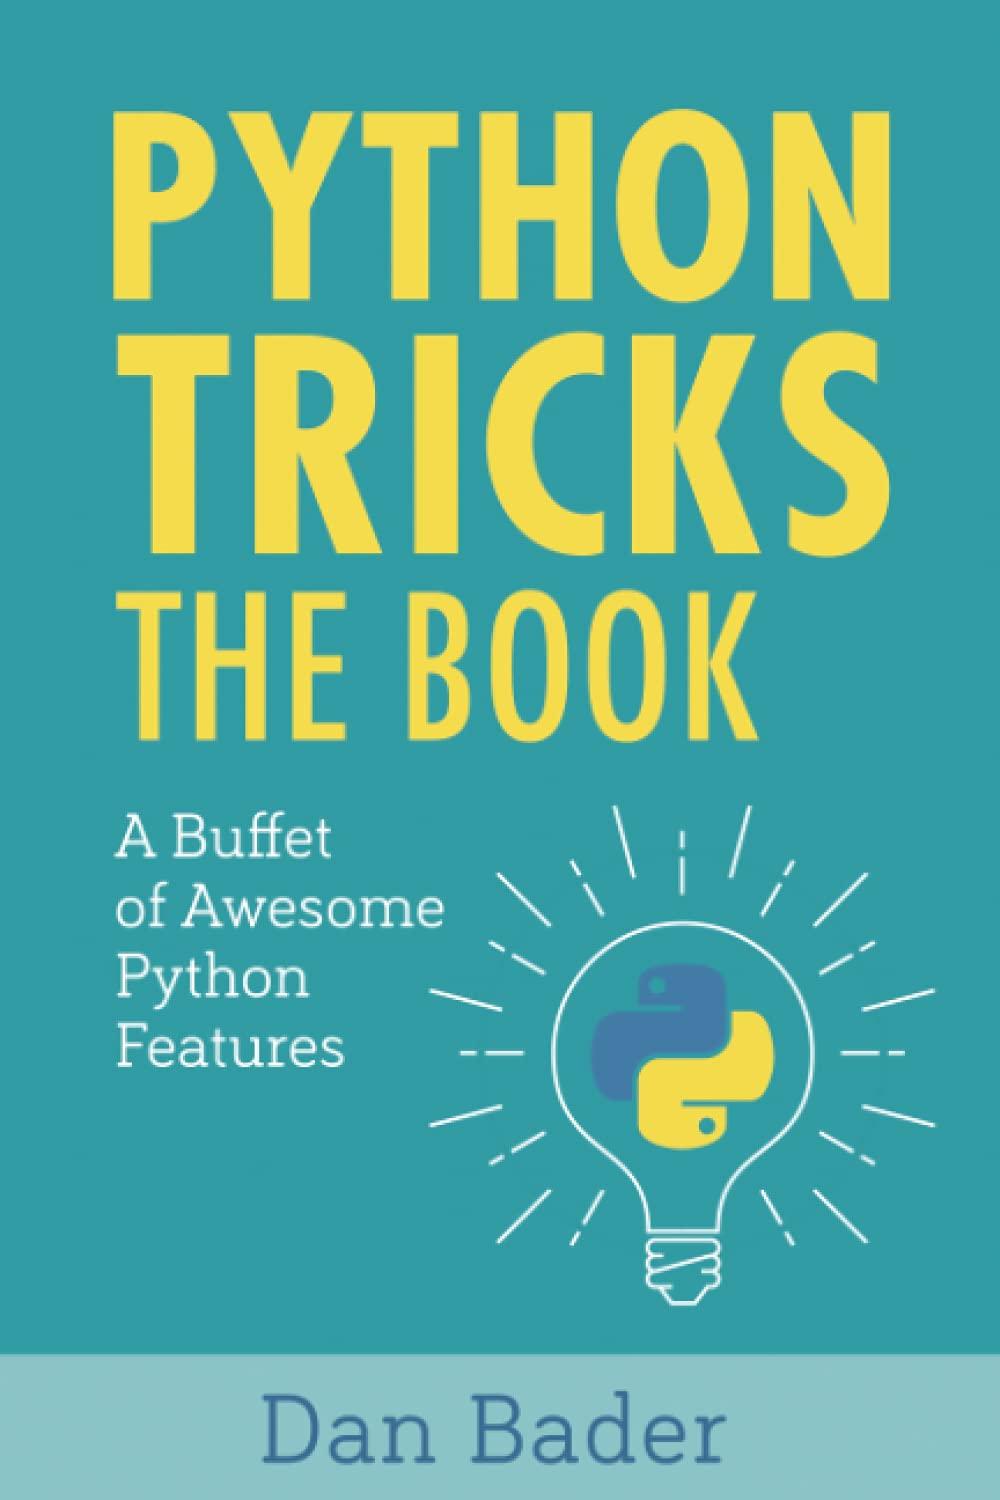 python tricks a buffet of awesome python features 1st edition dan bader 1775093301, 978-1775093305